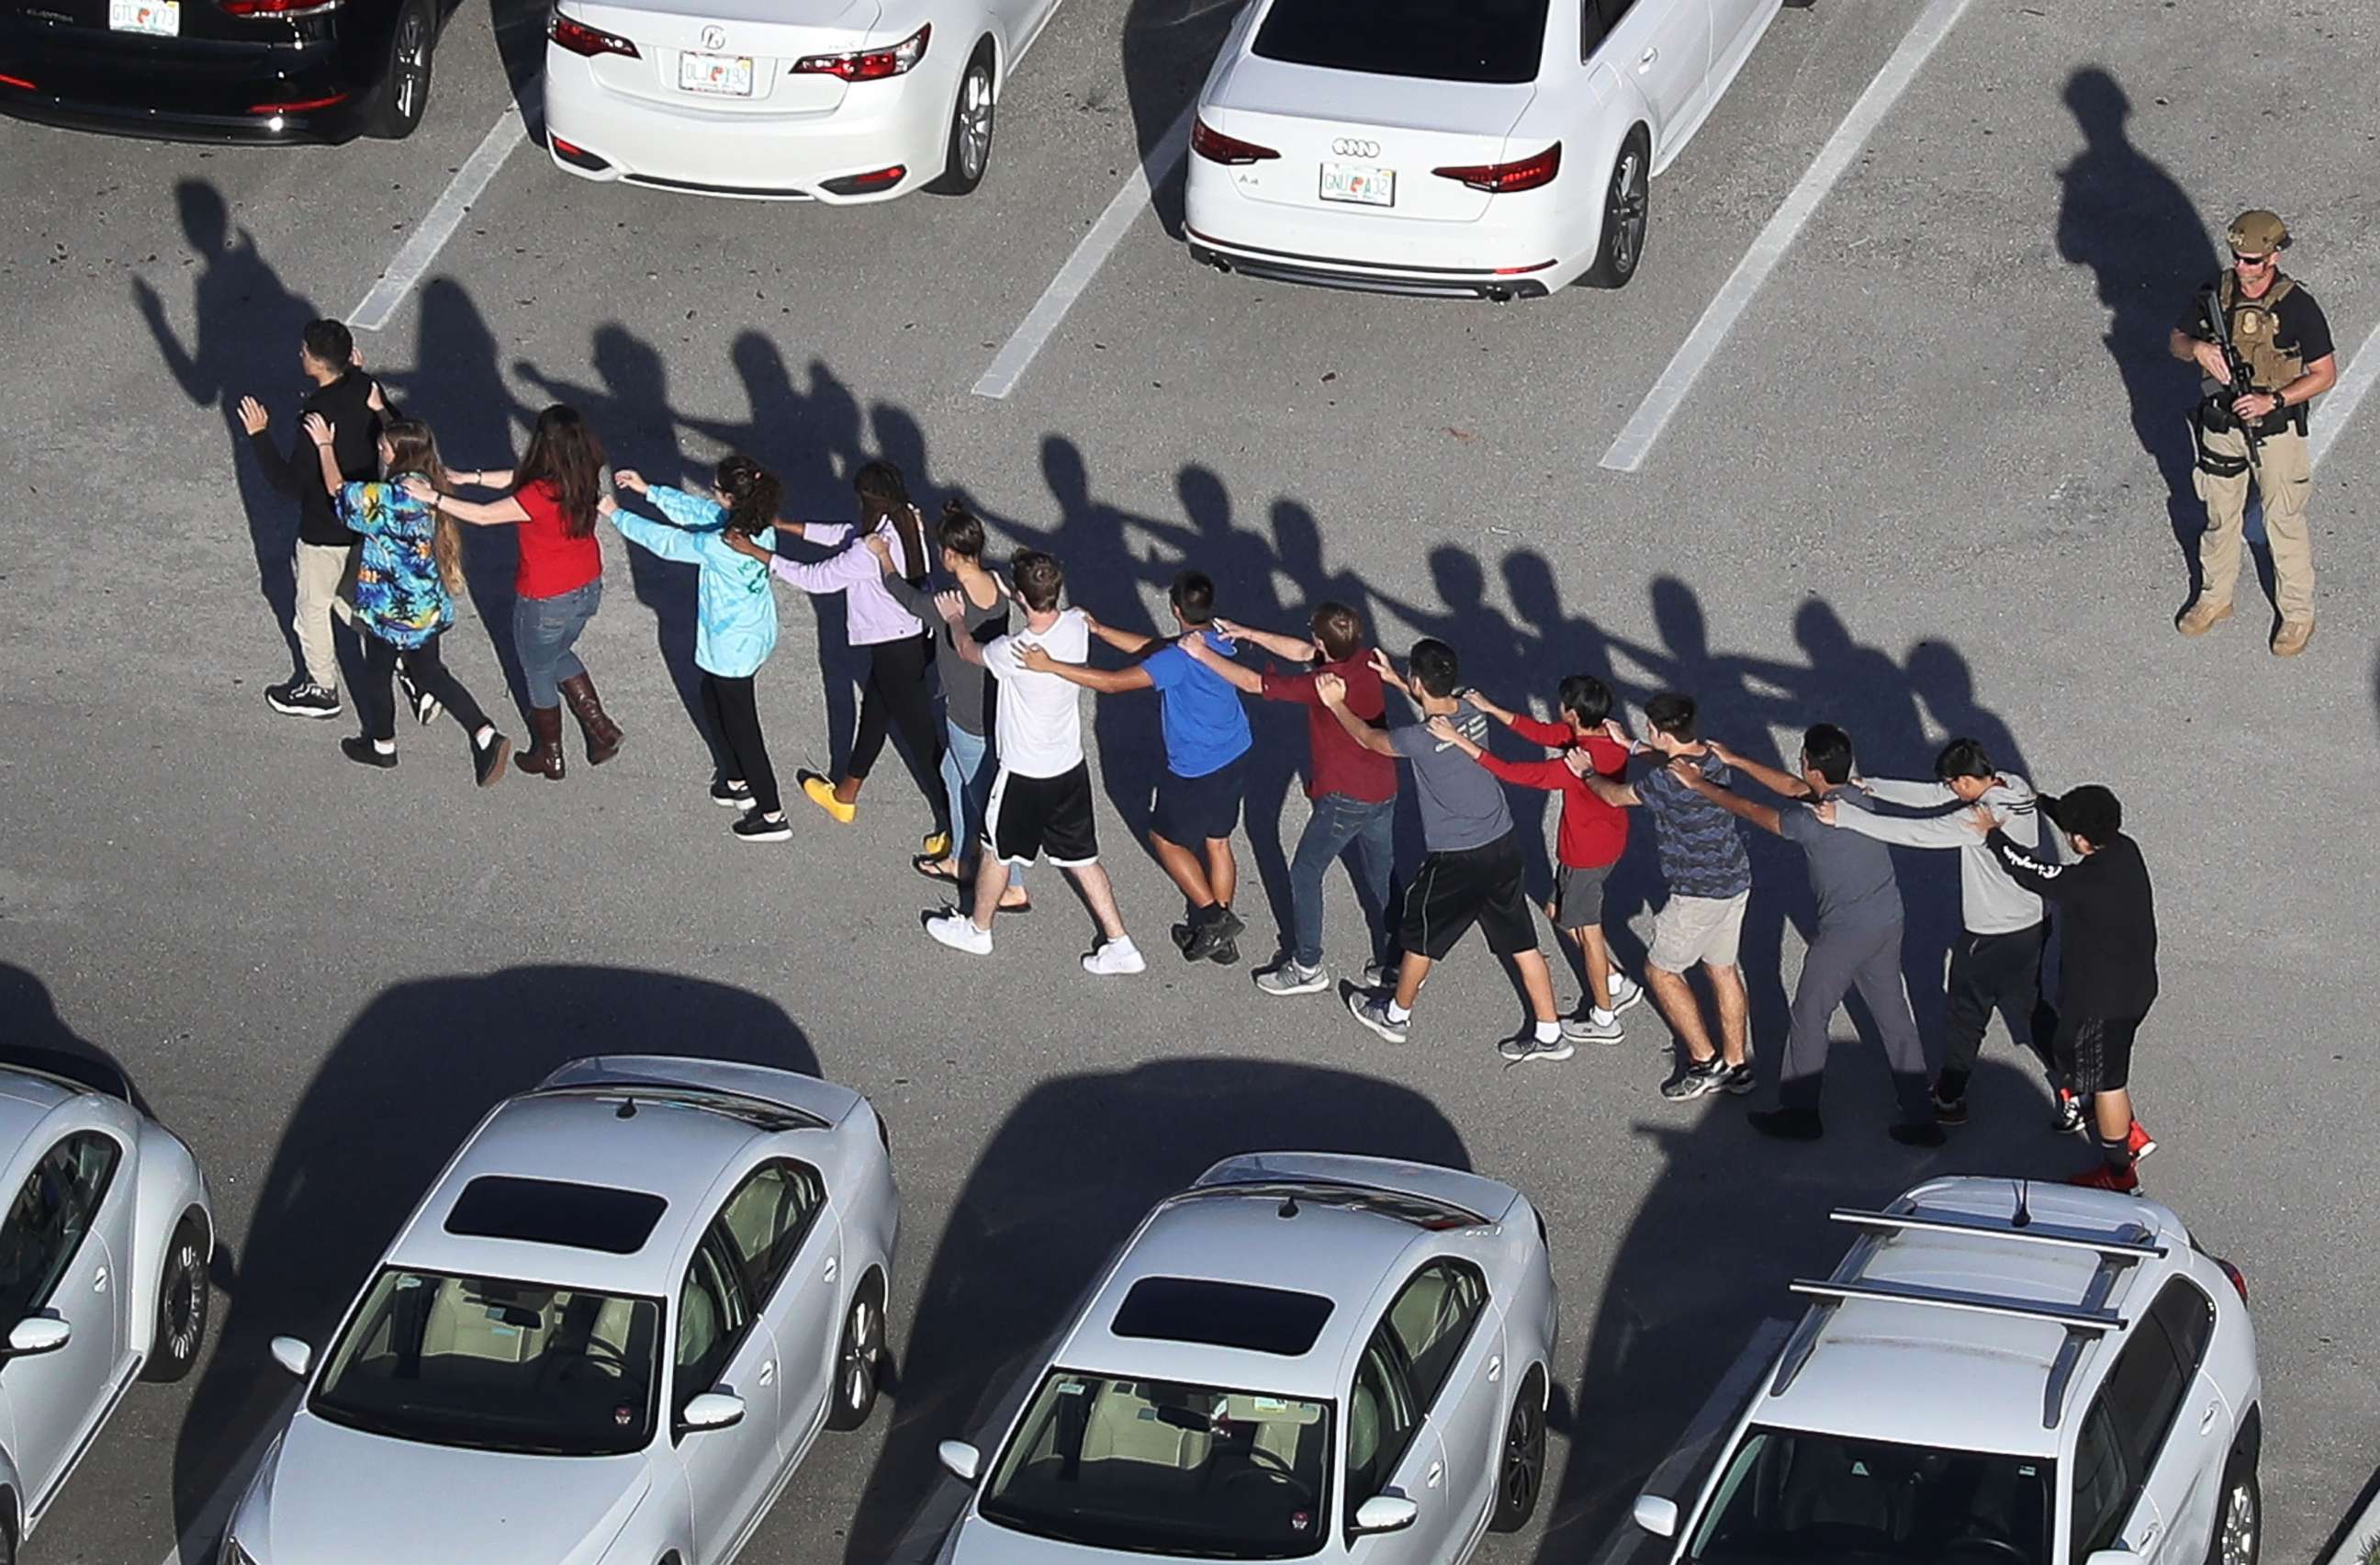 PHOTO: In this Feb.14, 2018 file photo people are brought out of the Marjory Stoneman Douglas High School after a shooting at the school in Parkland, Fla.